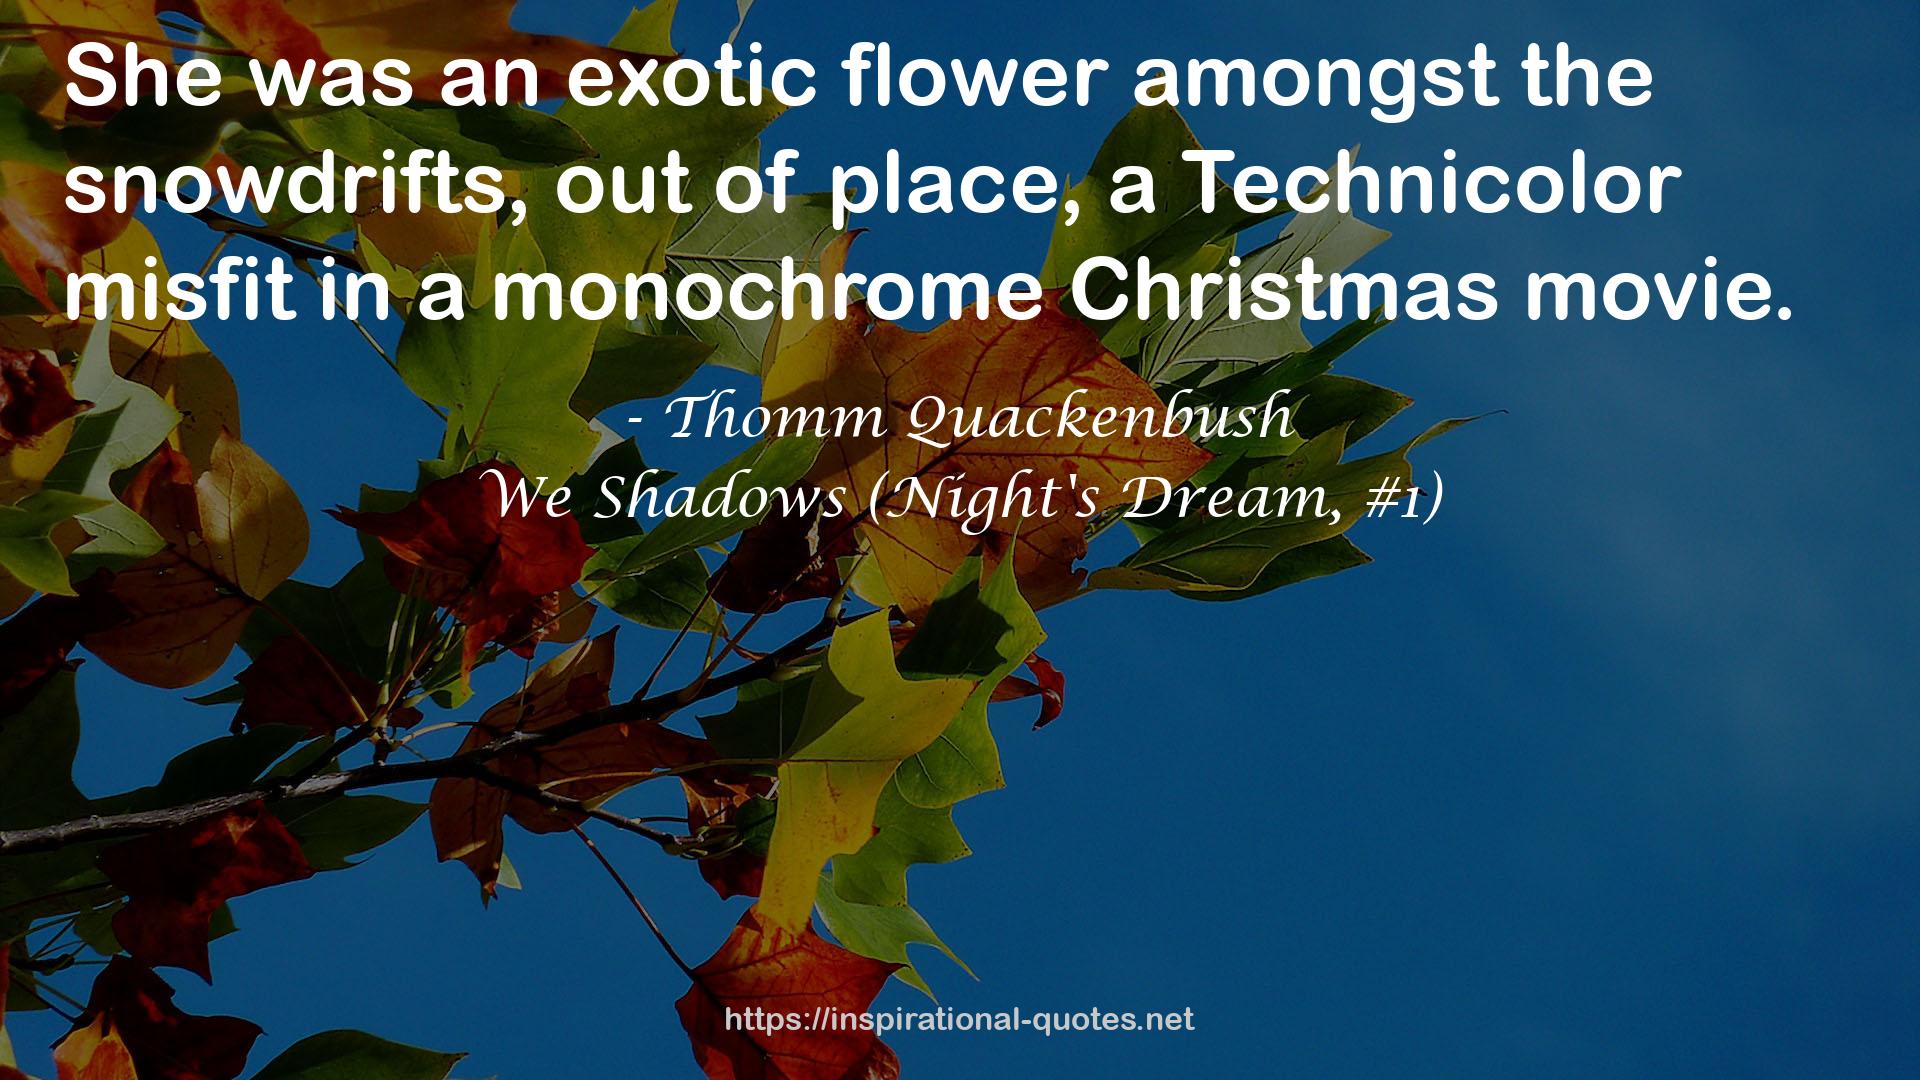 We Shadows (Night's Dream, #1) QUOTES